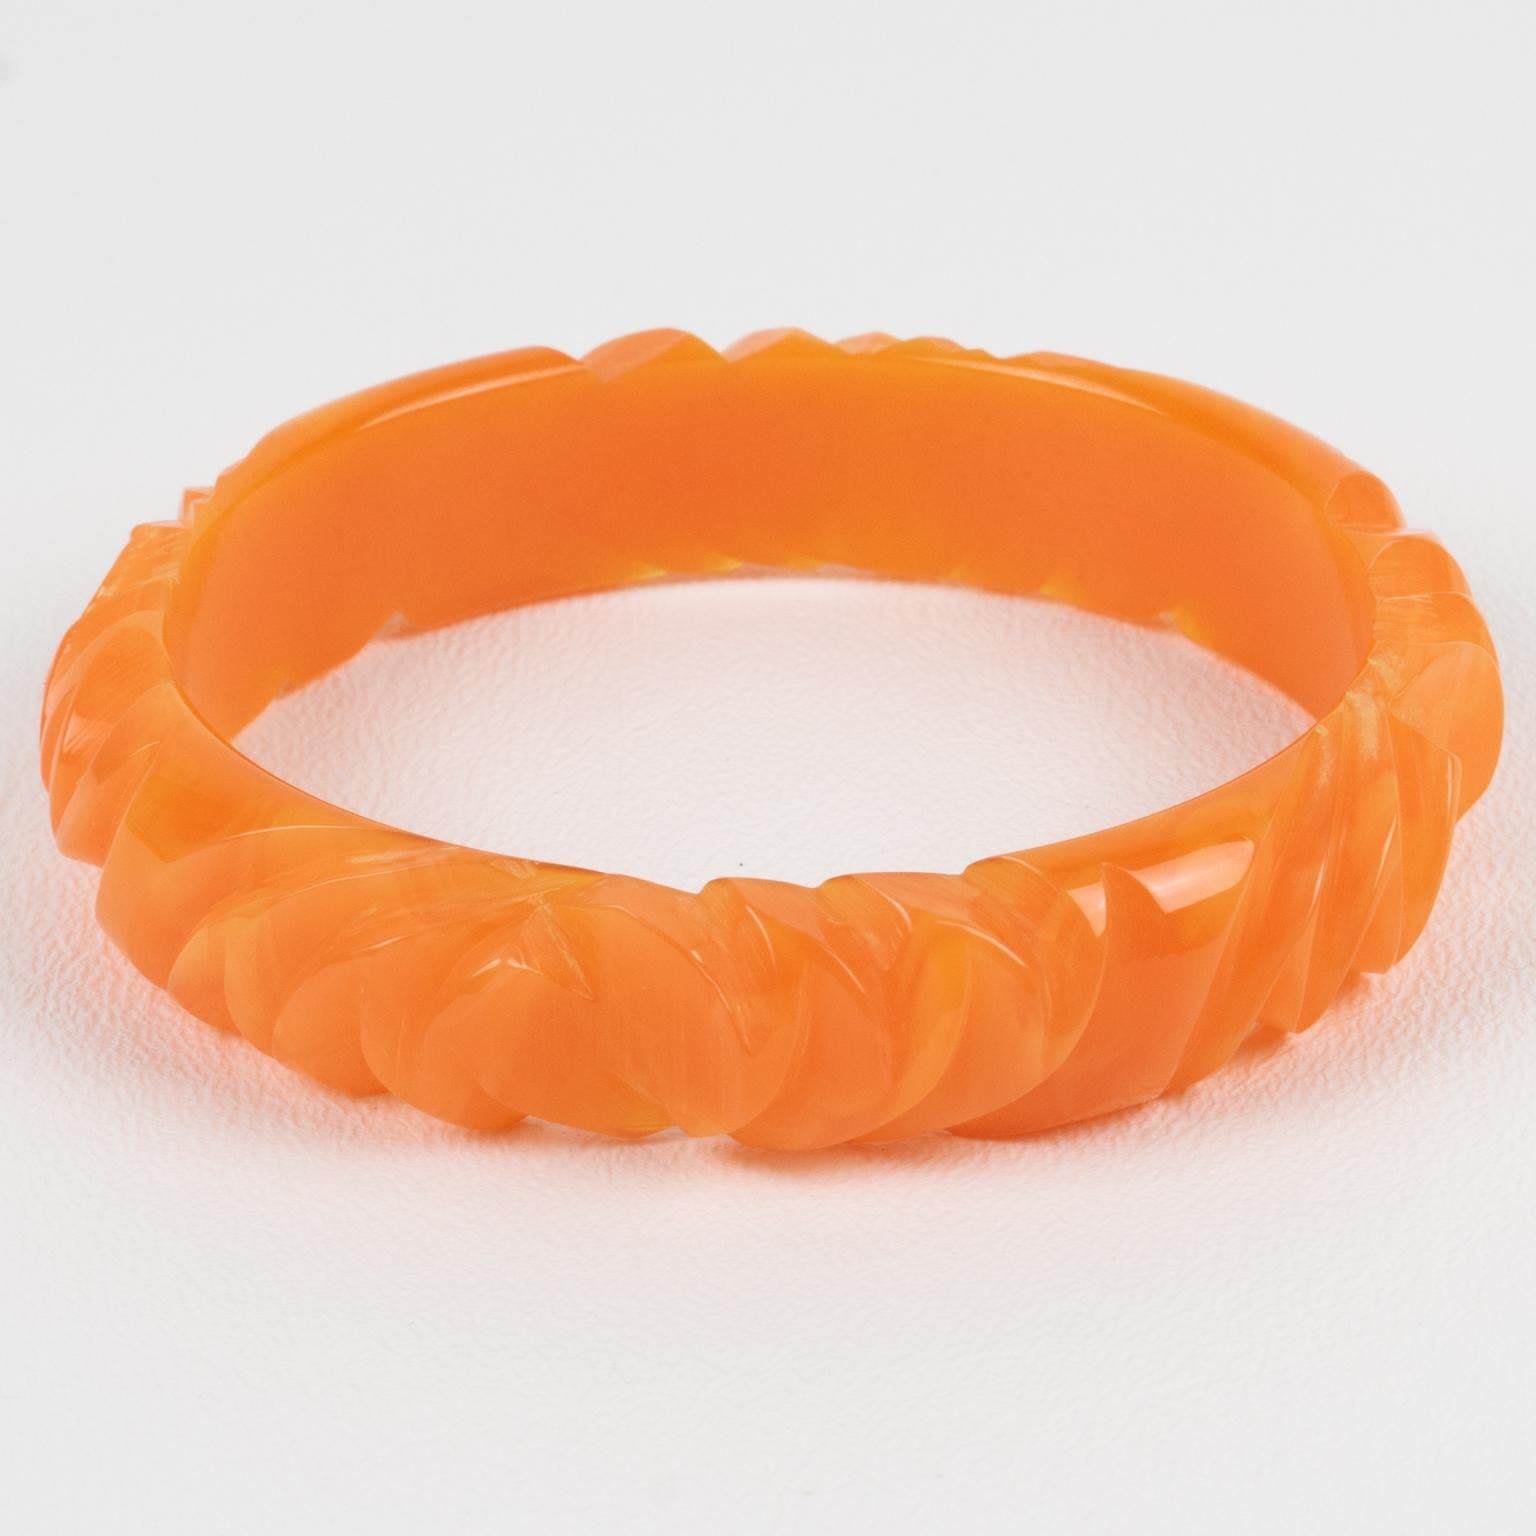 This is a lovely milky orange papaya Bakelite carved bracelet bangle. It features a spacer domed shape with deep geometric carving all around. The color is an intense orange papaya tone with milky swirling. 
Measurements: Inside across is 2.57 in